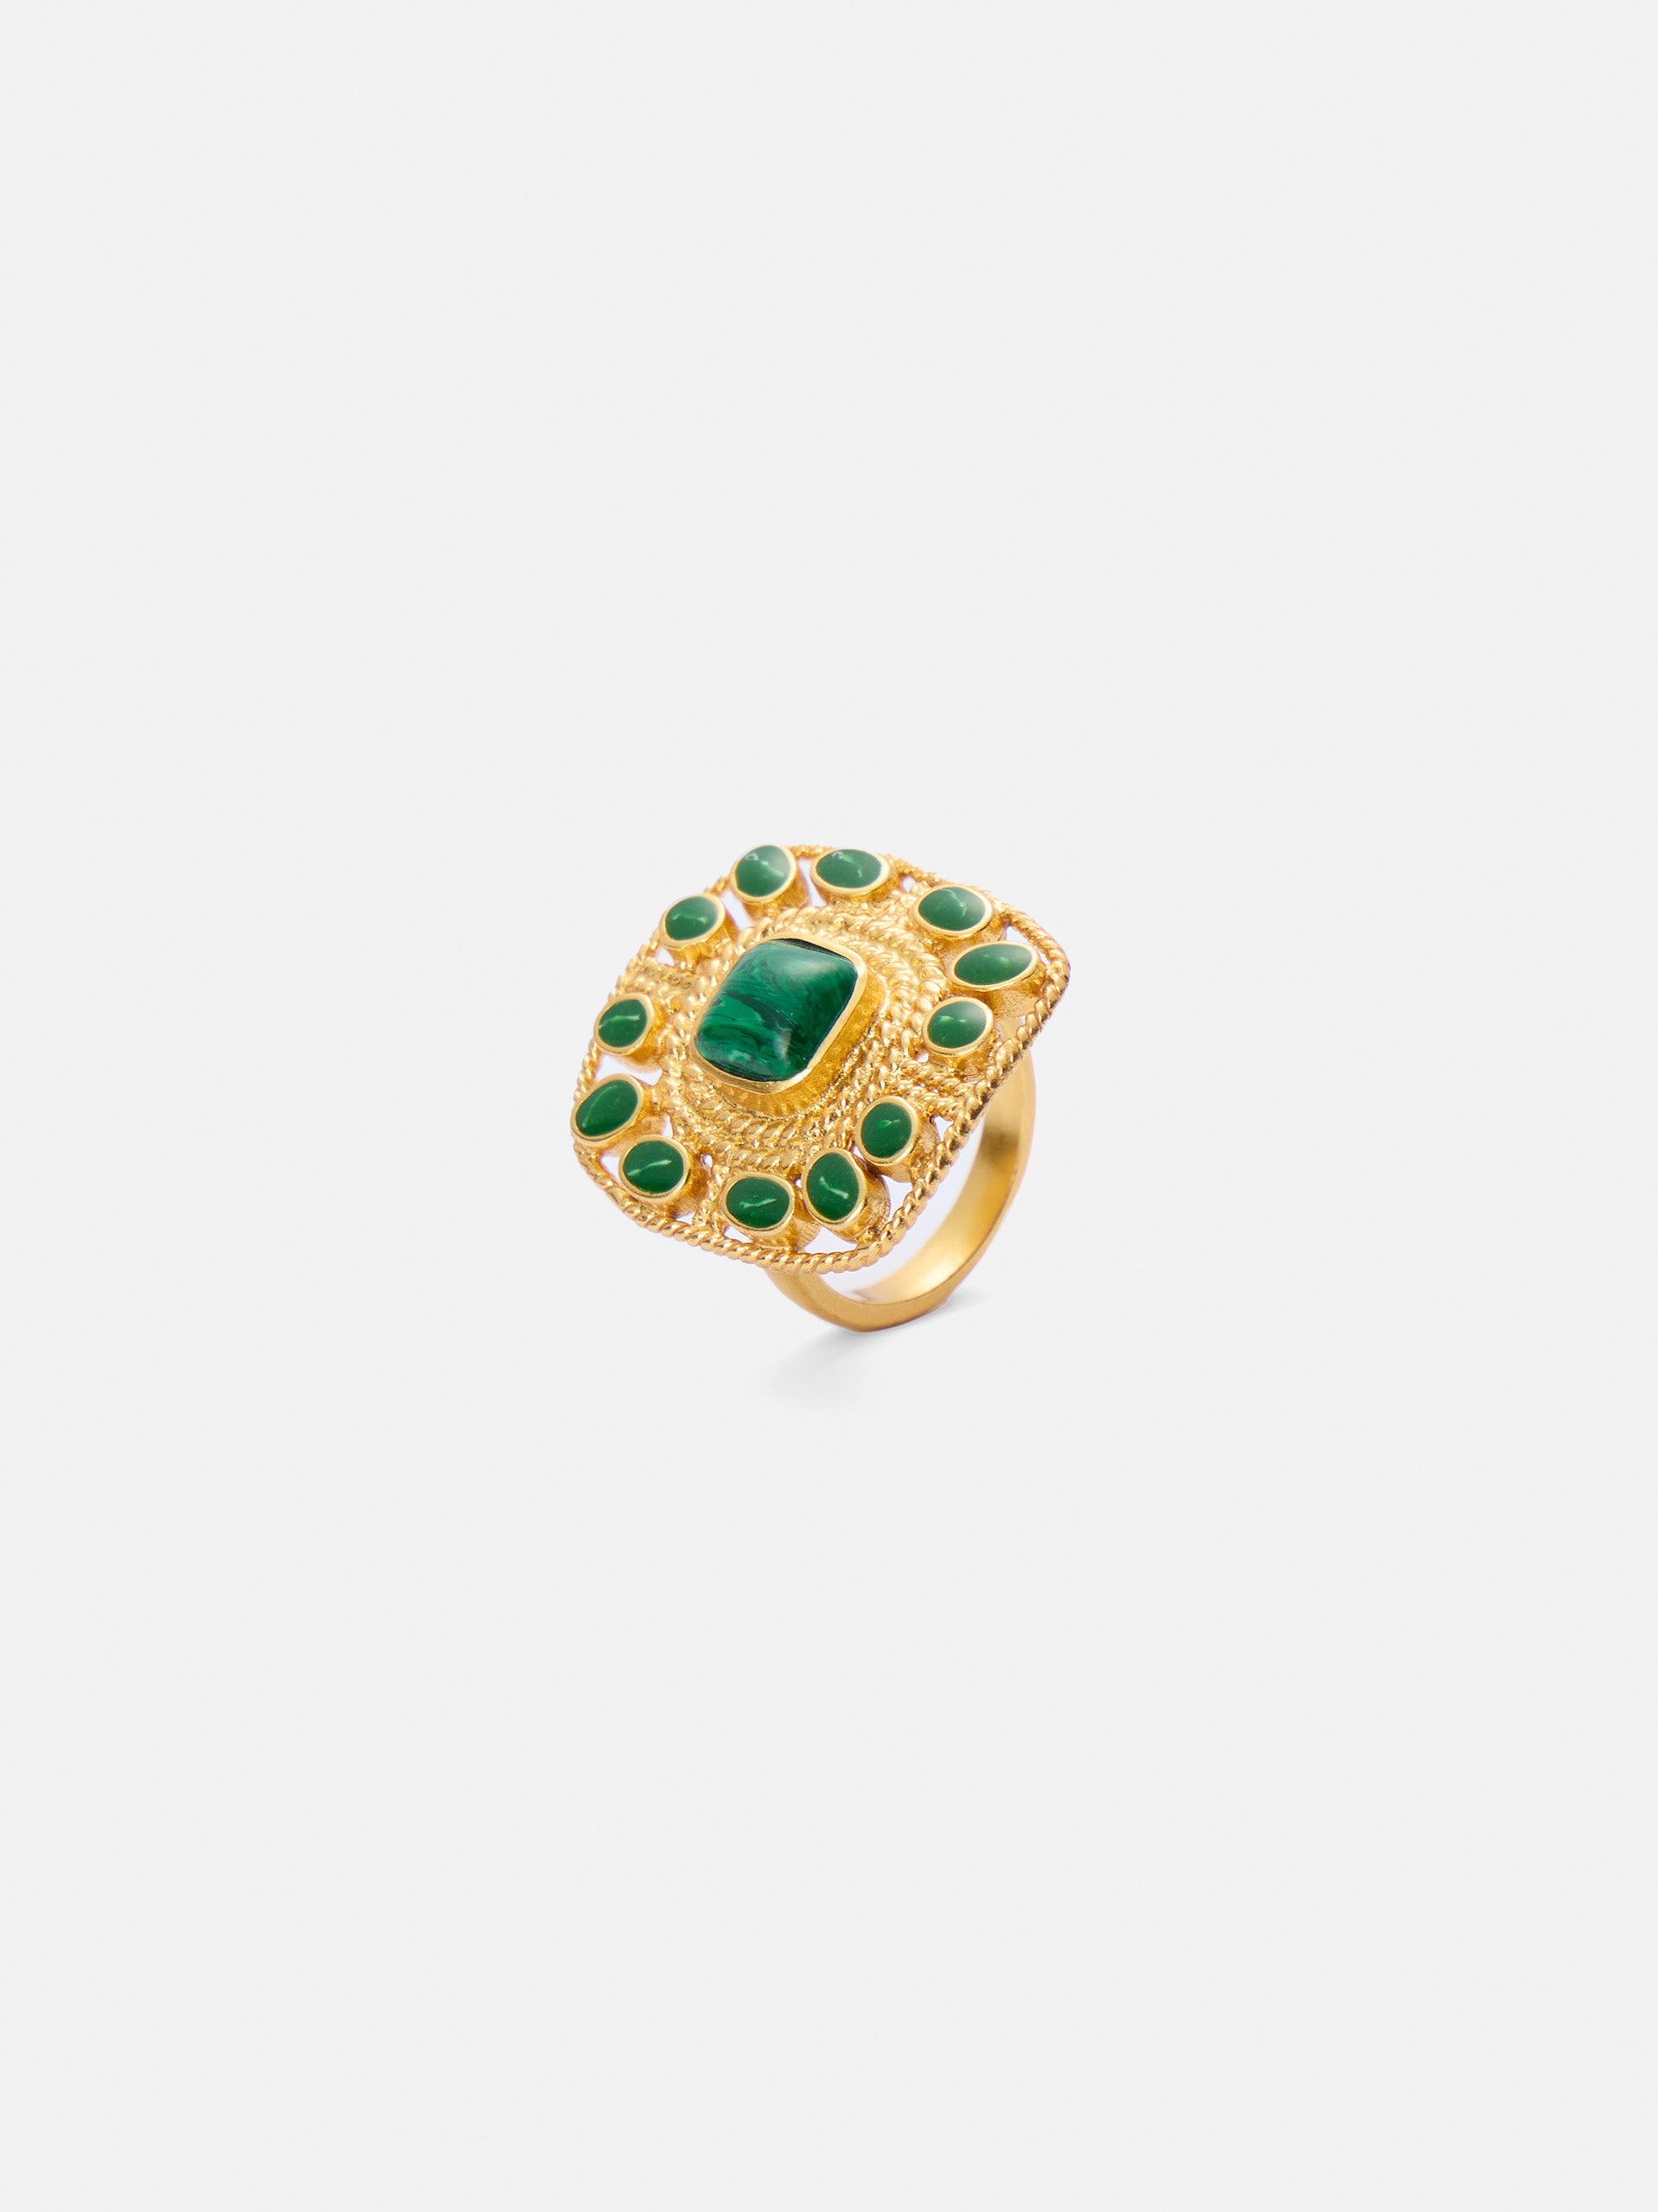 Golden ring with green stones